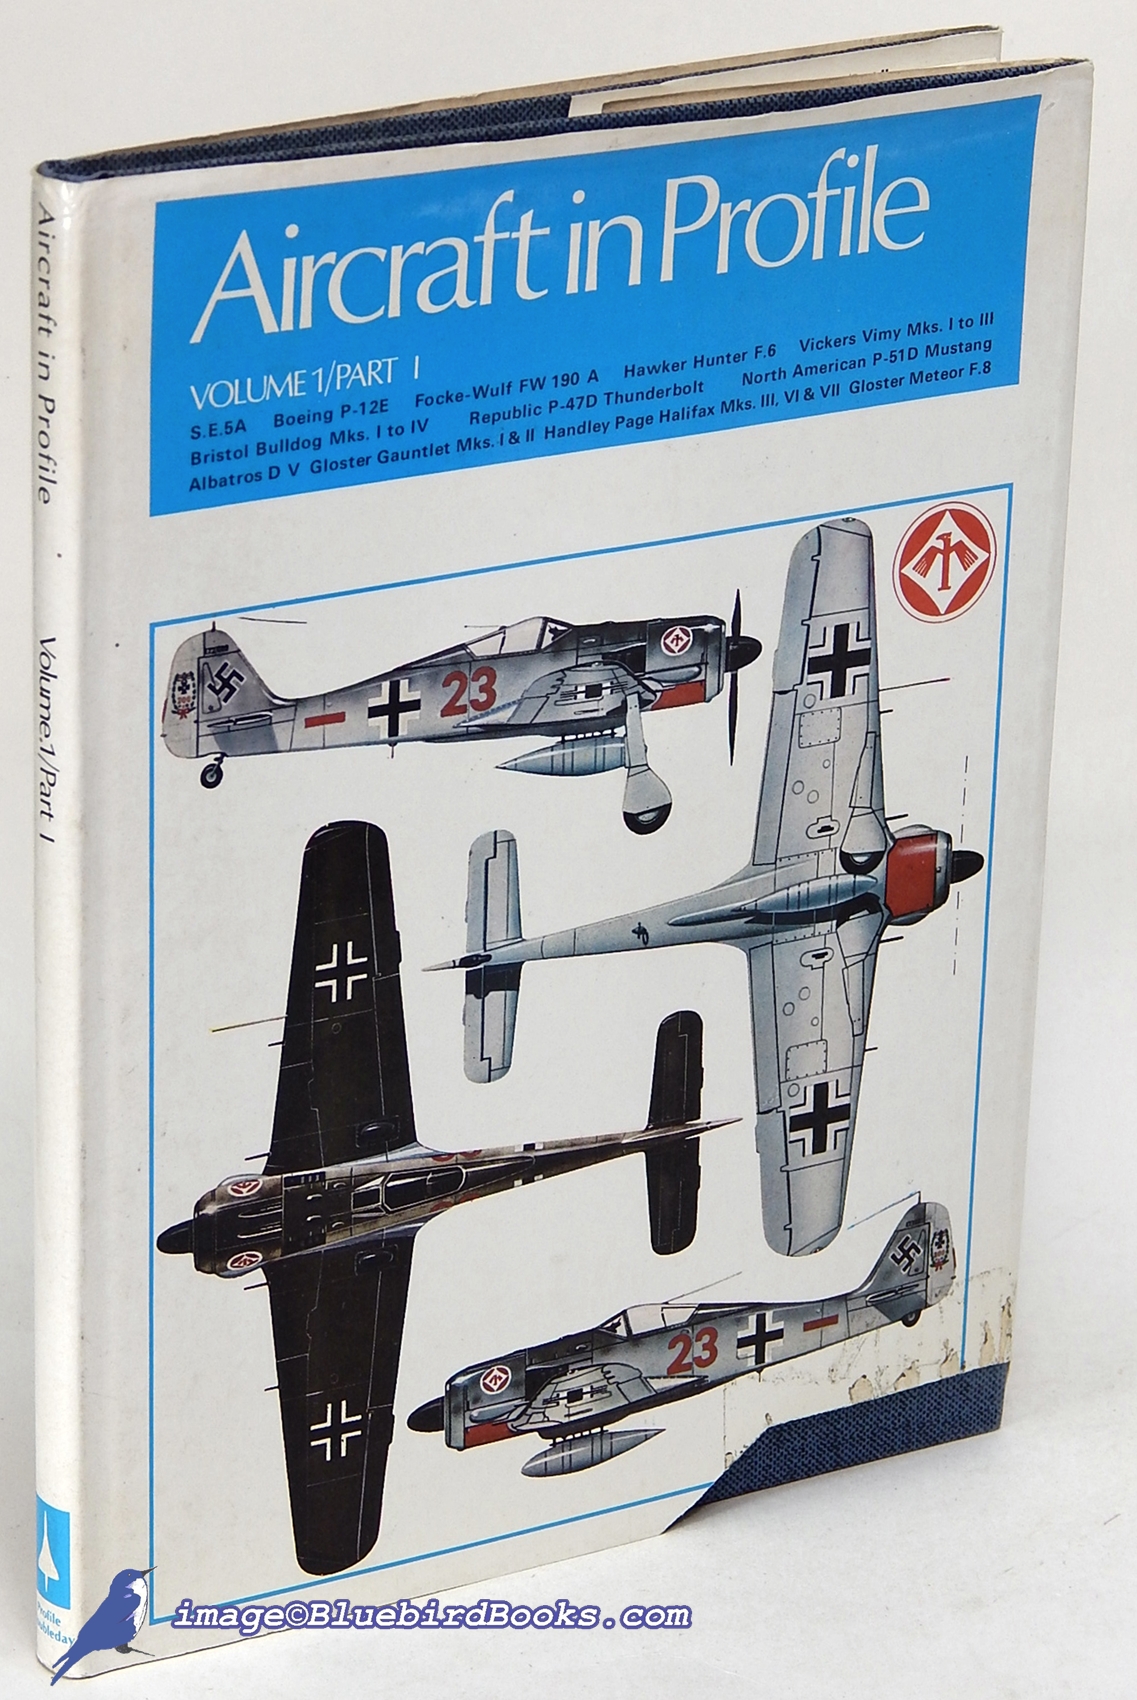 Aircraft In Profile Volume 1/Part One - CAIN, Charles W. (general editor)